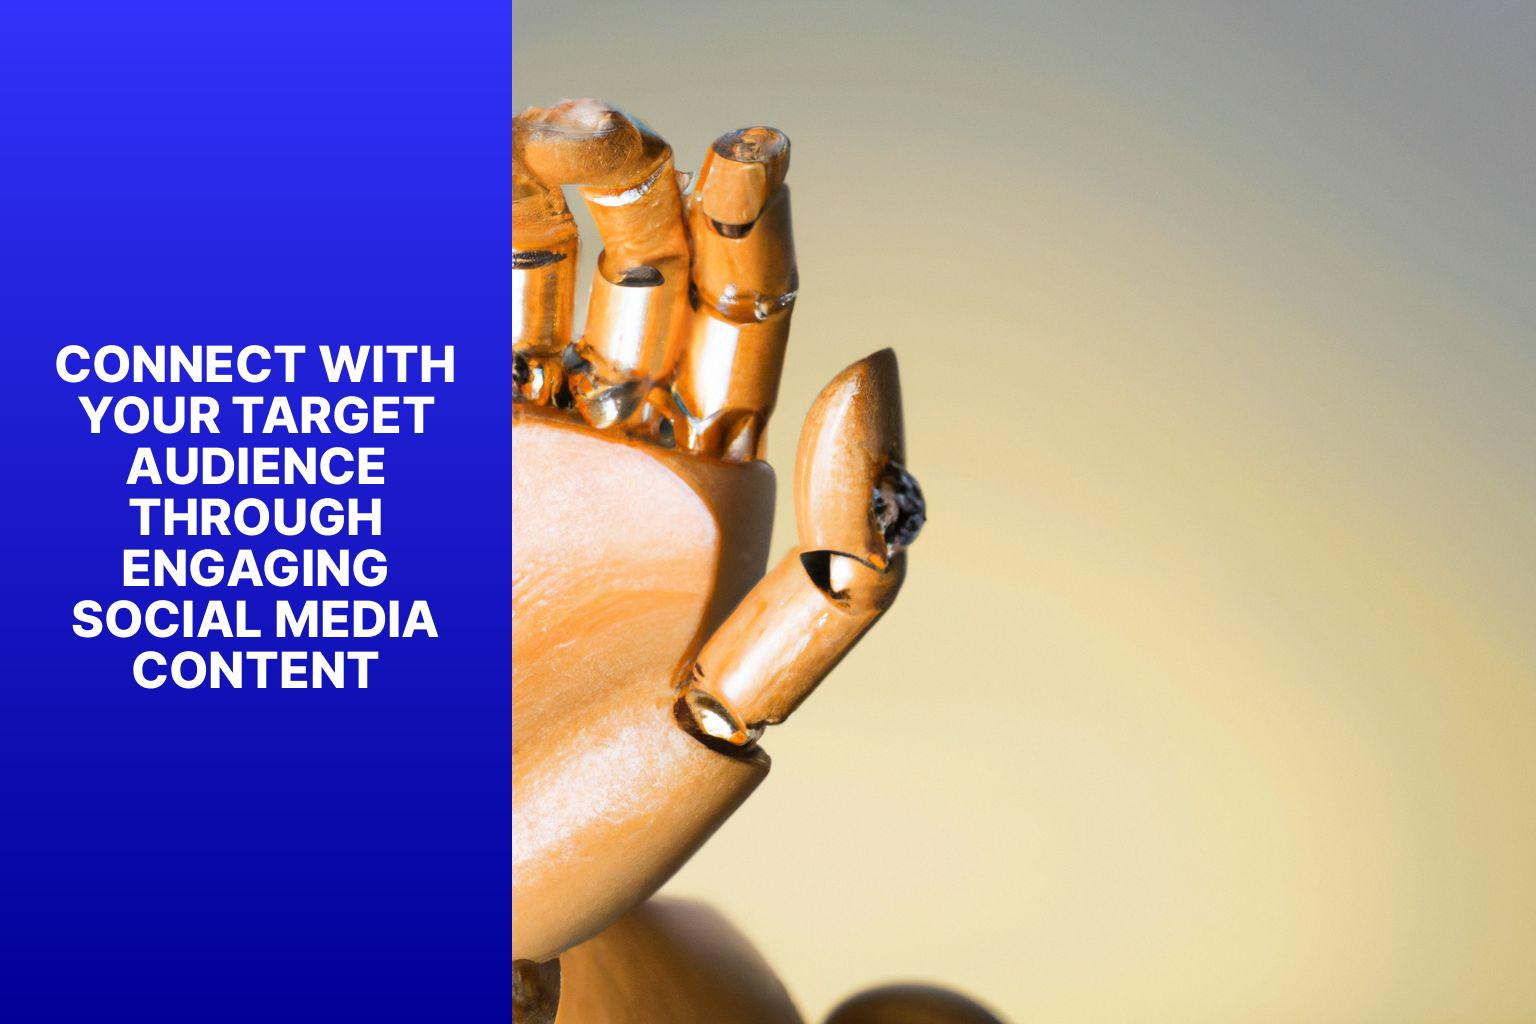 Connect with Your Target Audience through Engaging Social Media Content